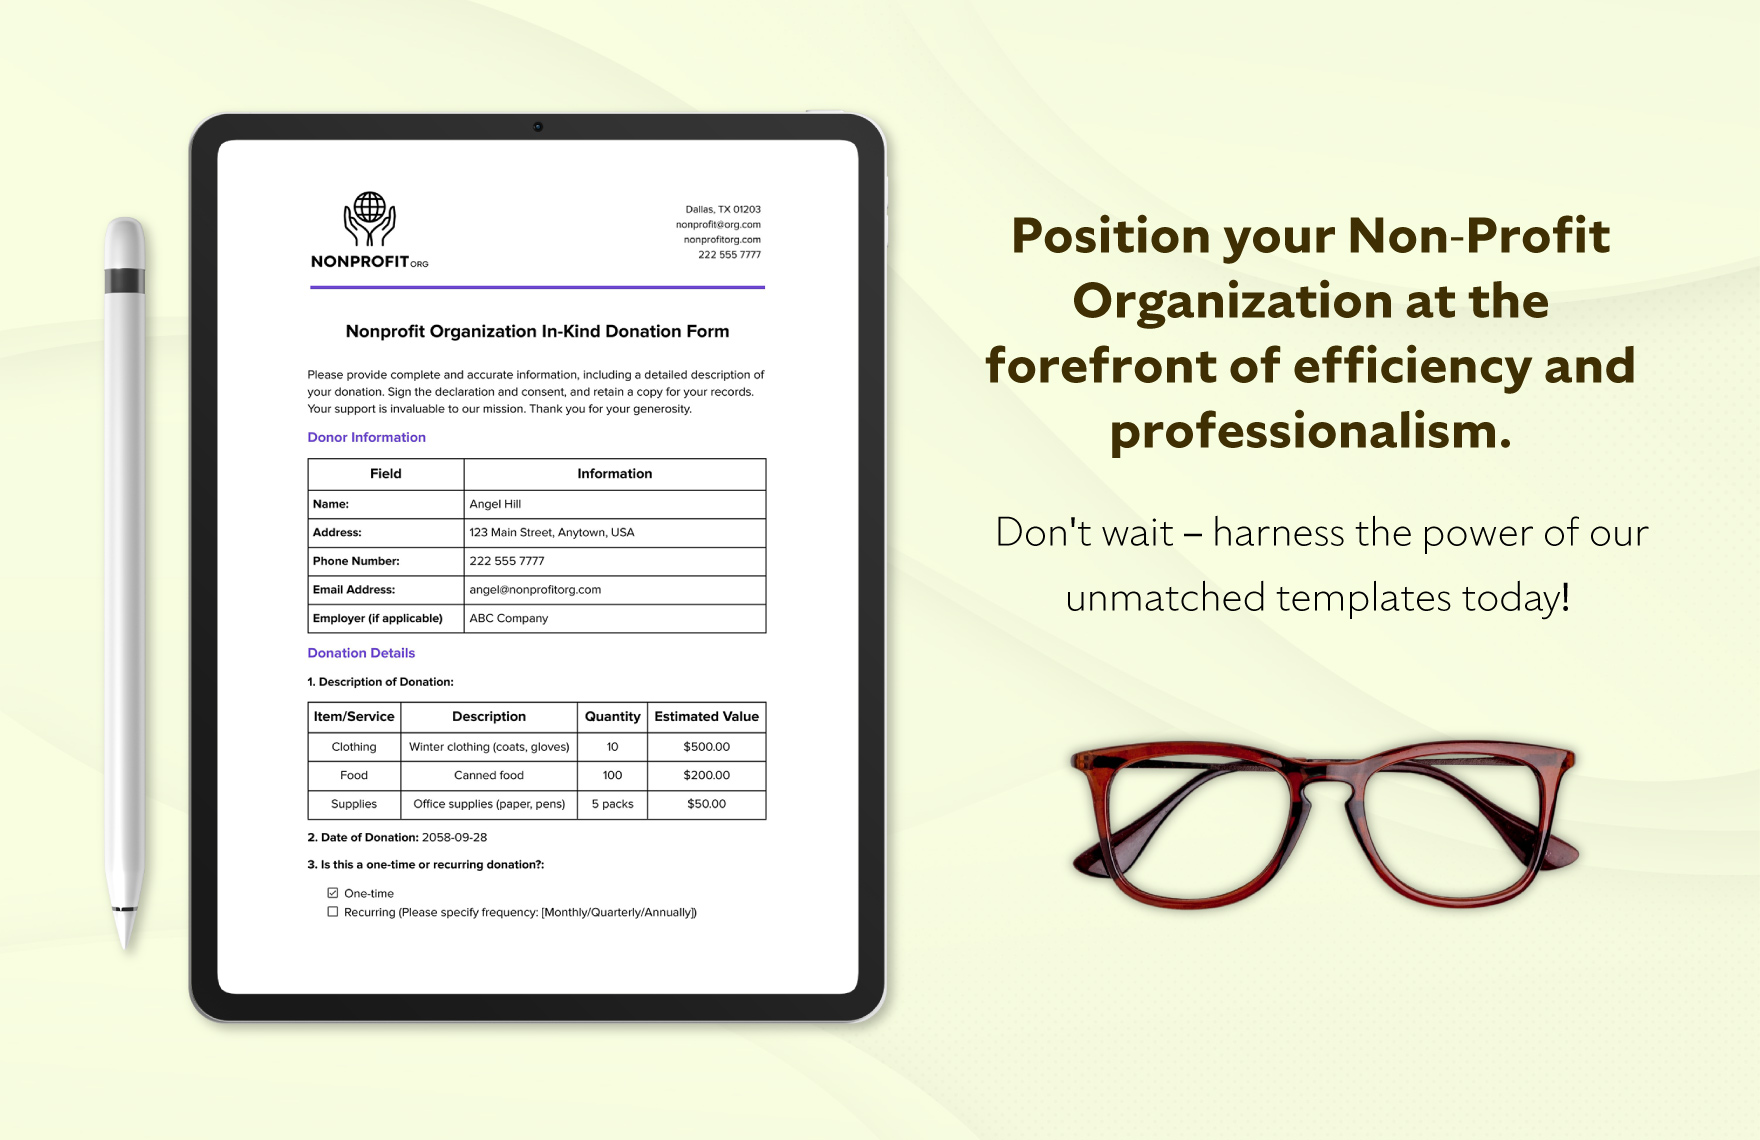 Nonprofit Organization In-Kind Donation Form Template